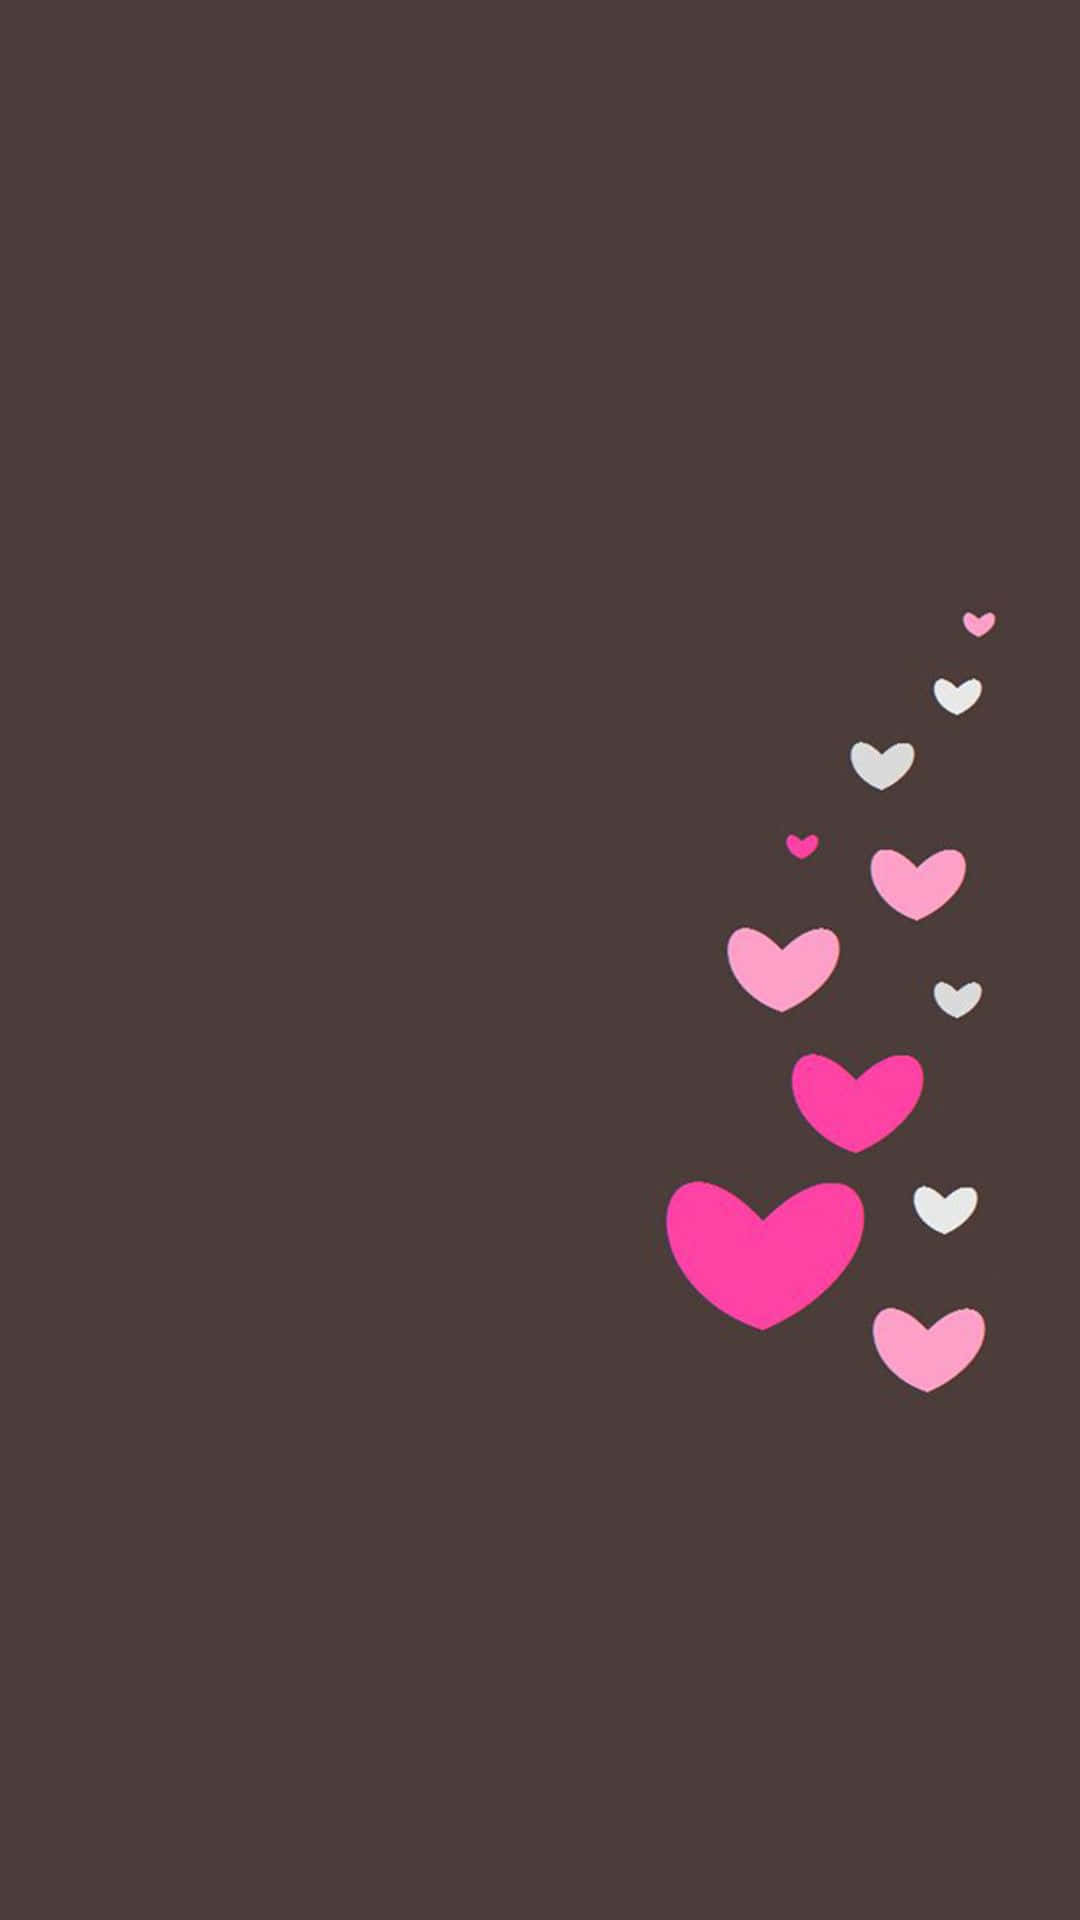 Cute Background Of Pink Hearts On Brown Scrim